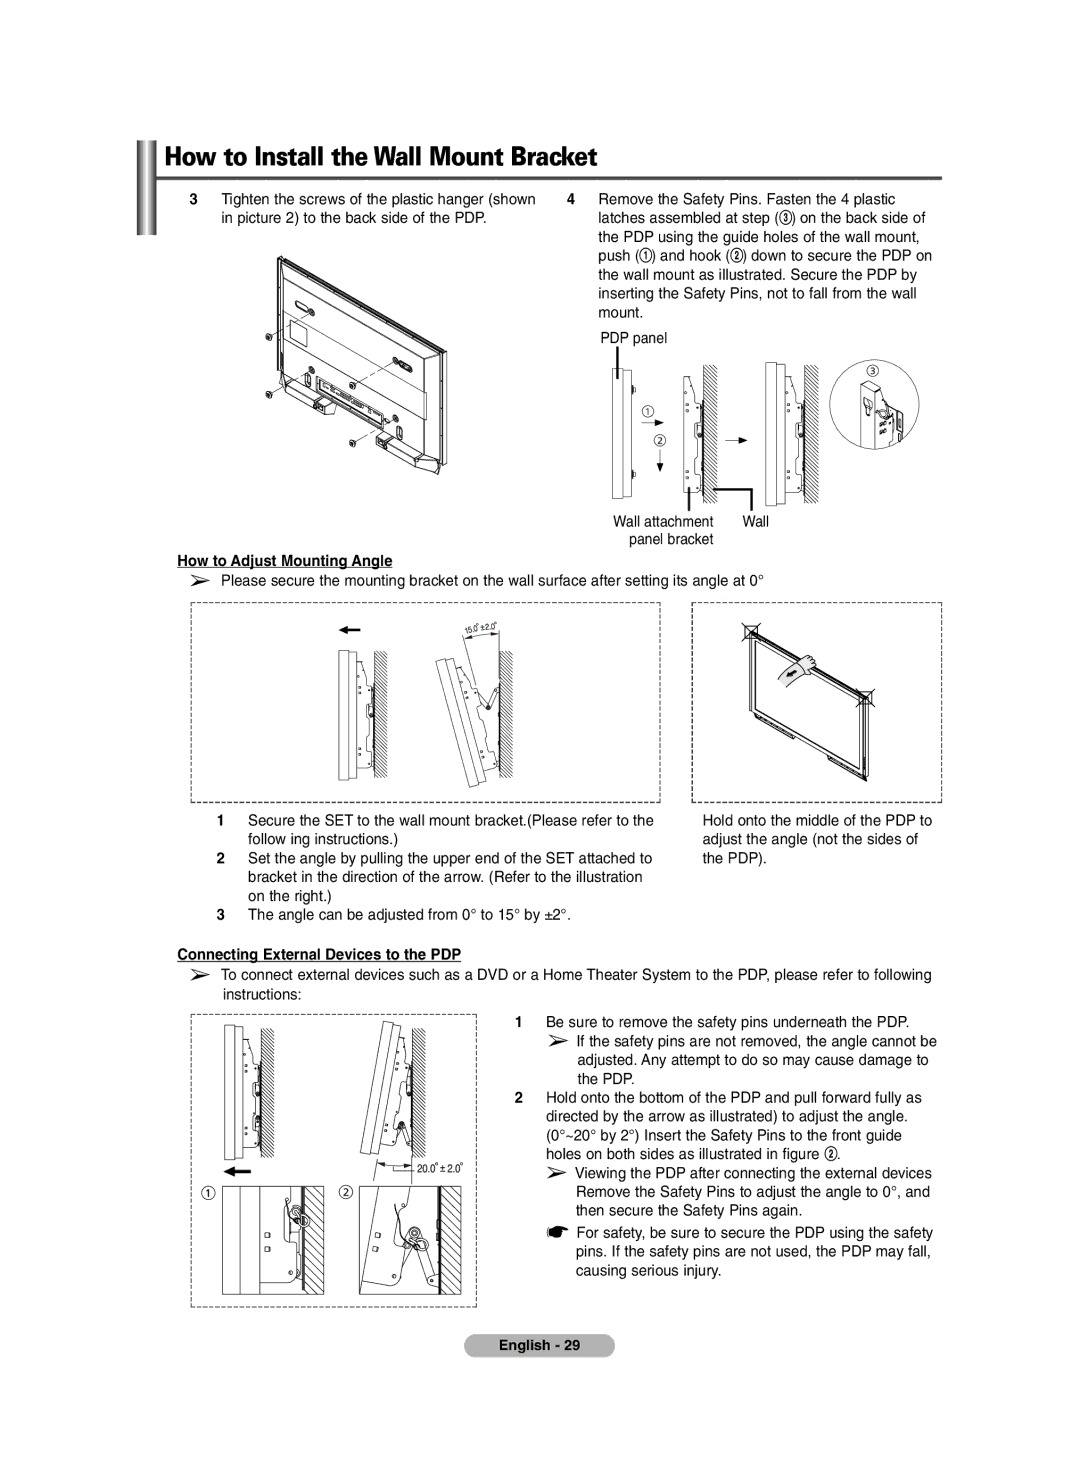 Samsung PS-42E7H, PS-42E7S manual How to Adjust Mounting Angle, Connecting External Devices to the PDP 